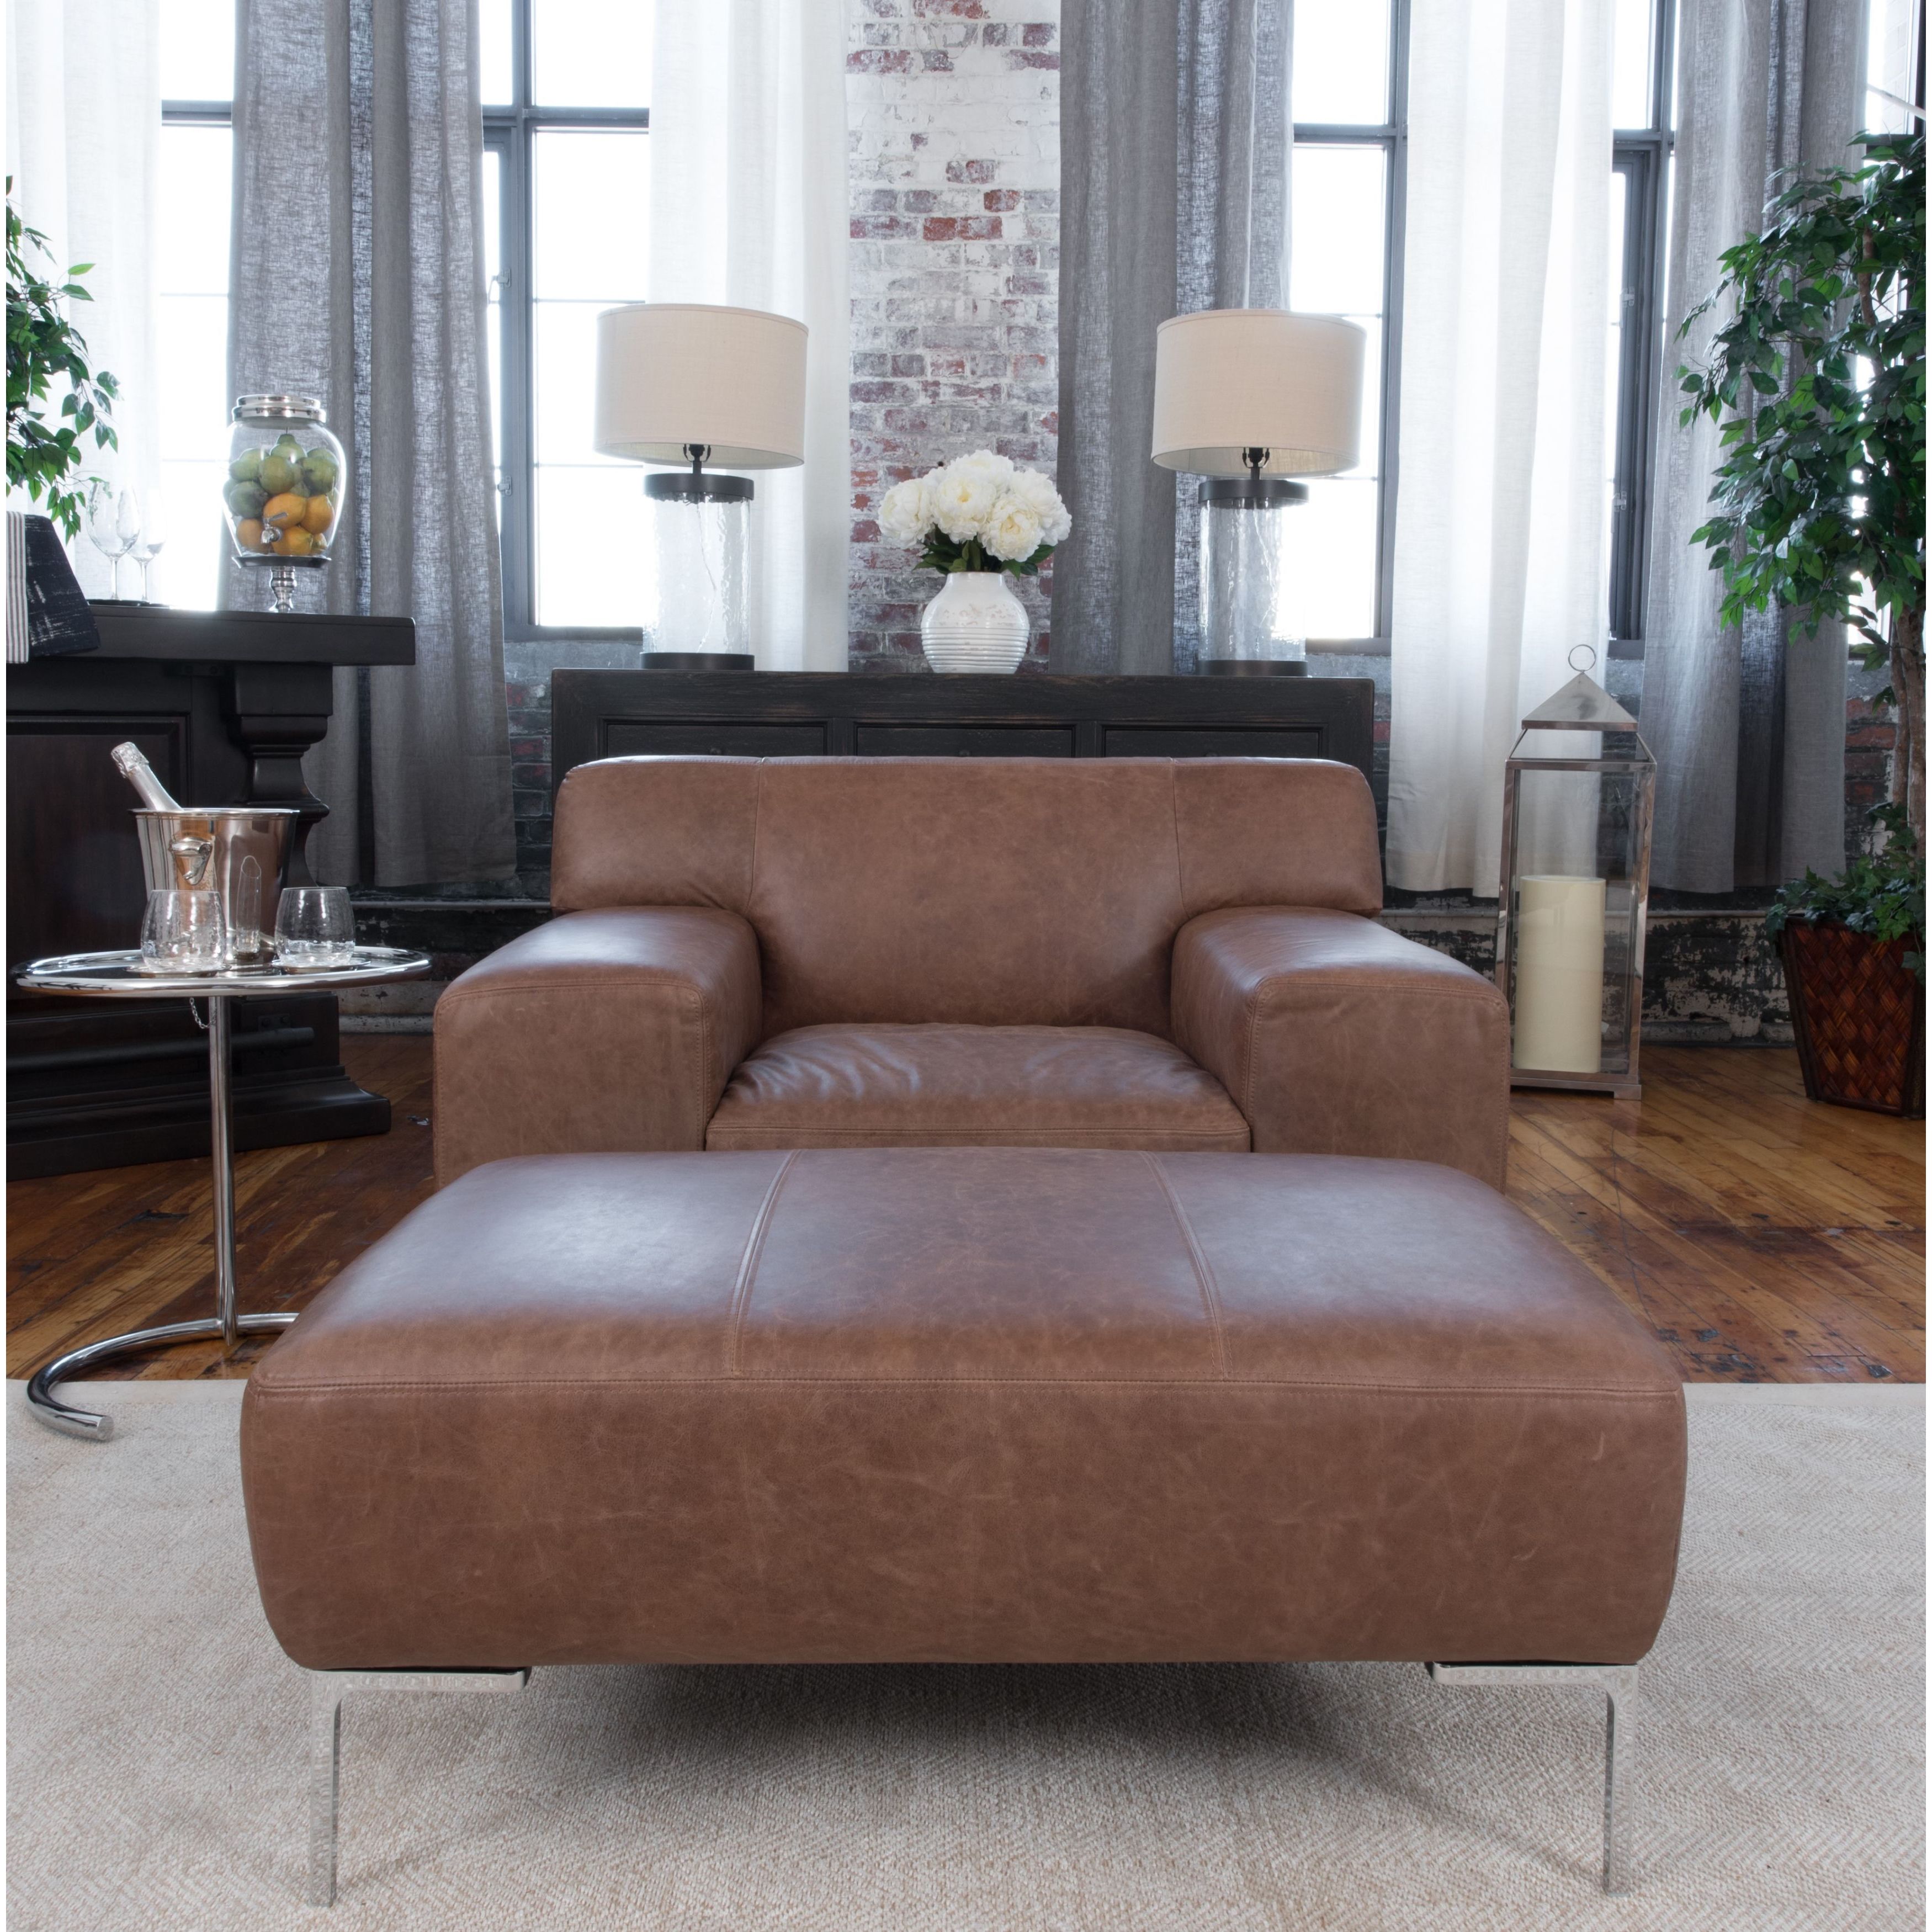 Featured image of post Oversized Leather Chair And Ottoman Sets : Pet free smoke free home.